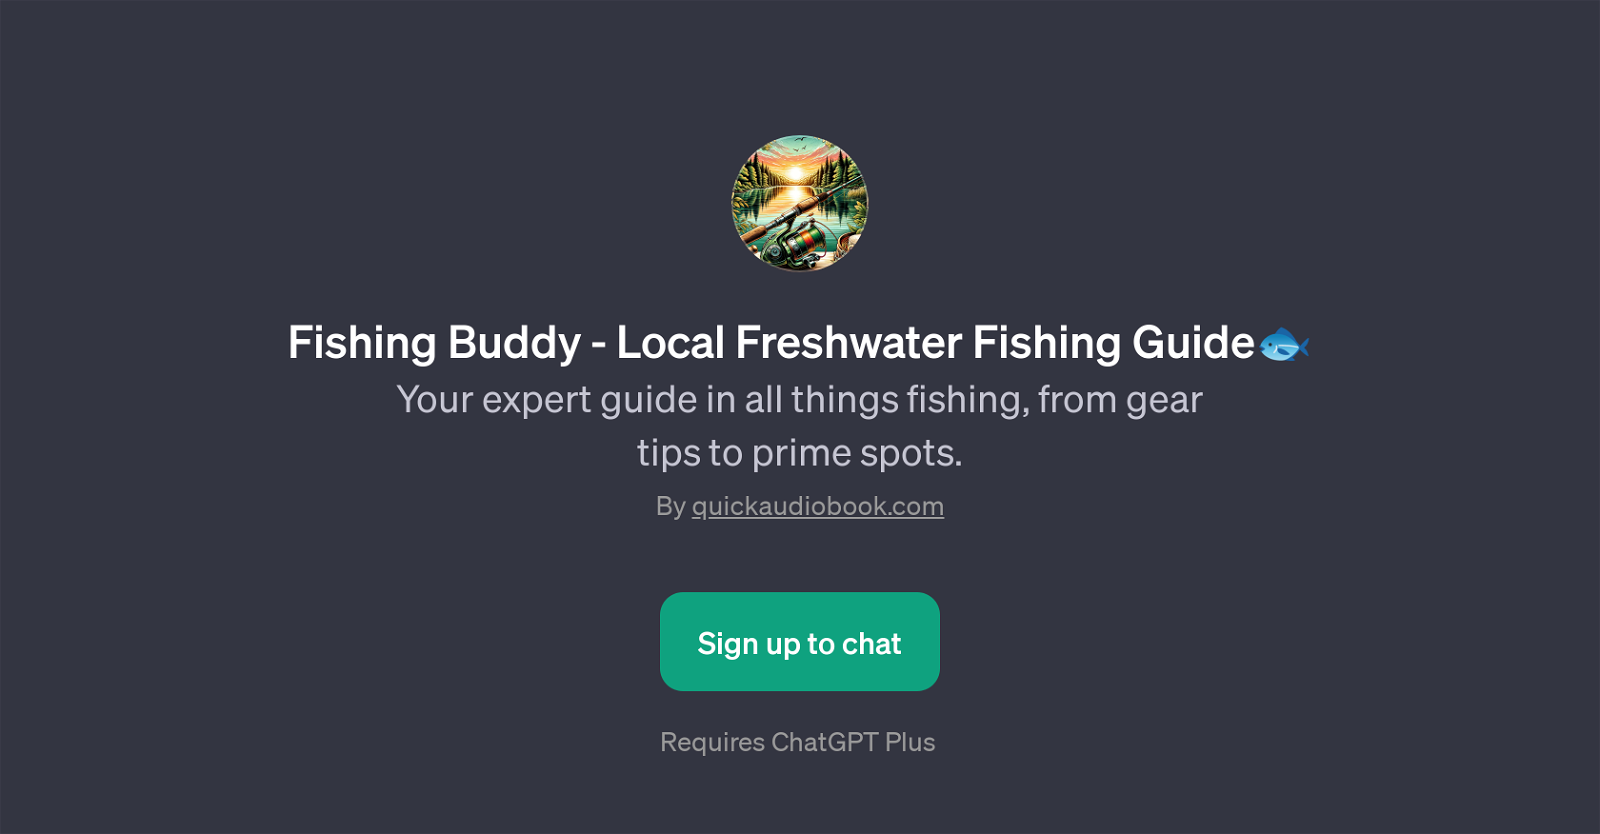 Fishing Buddy - Local Freshwater Fishing Guide And 7 Other AI